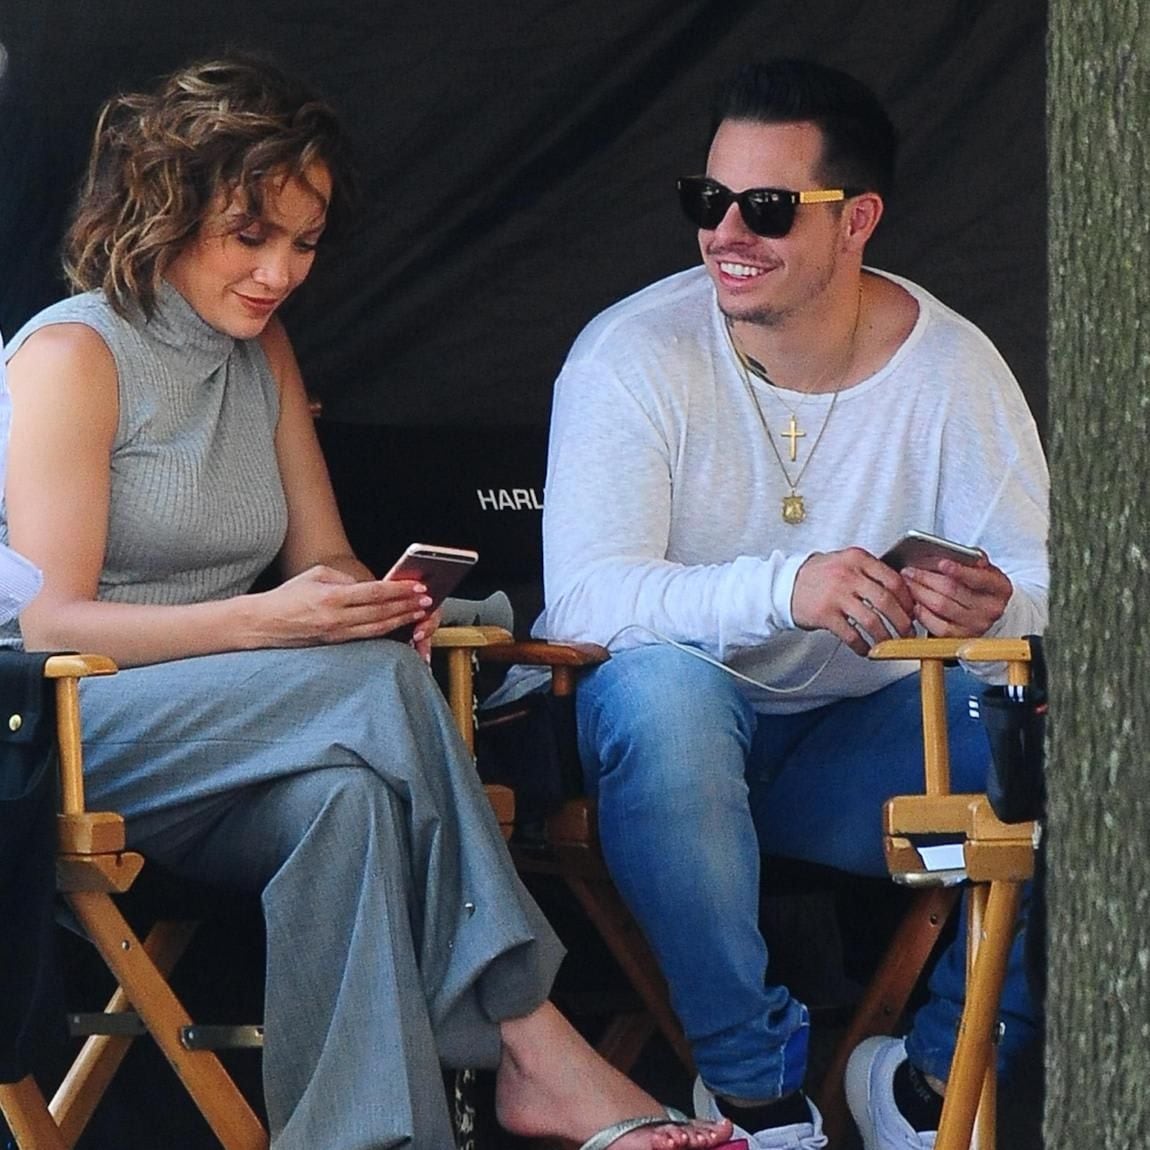 Jlo and Casper Smart on set of Shades of Blue